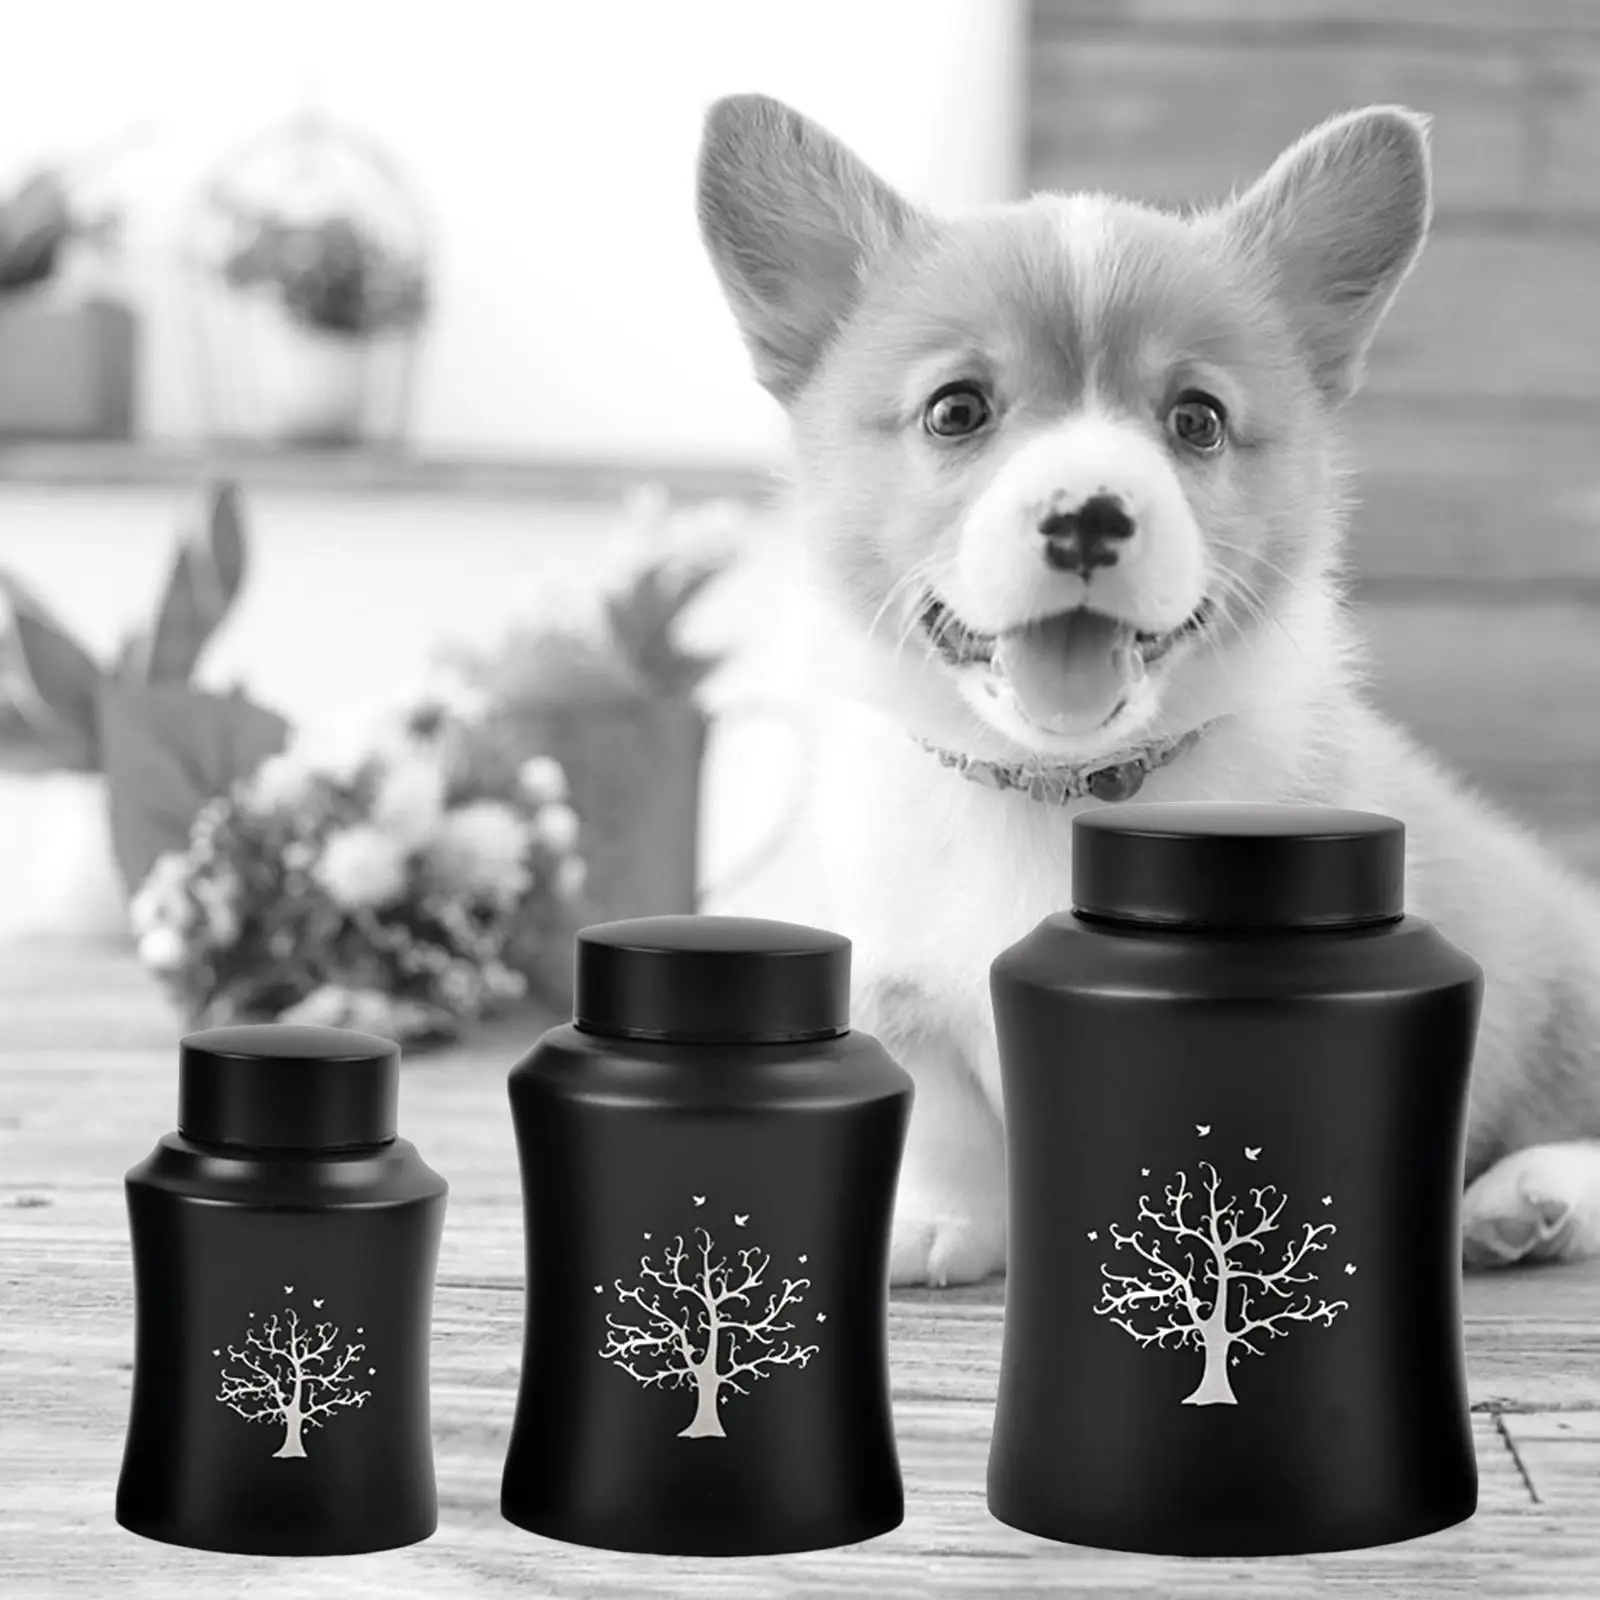 Pet Ash Urn Memories Peace and Comfort A Loving Resting Place Keepsake Souvenir Stainless Steel Urn Box for Dogs and Cats Ashes